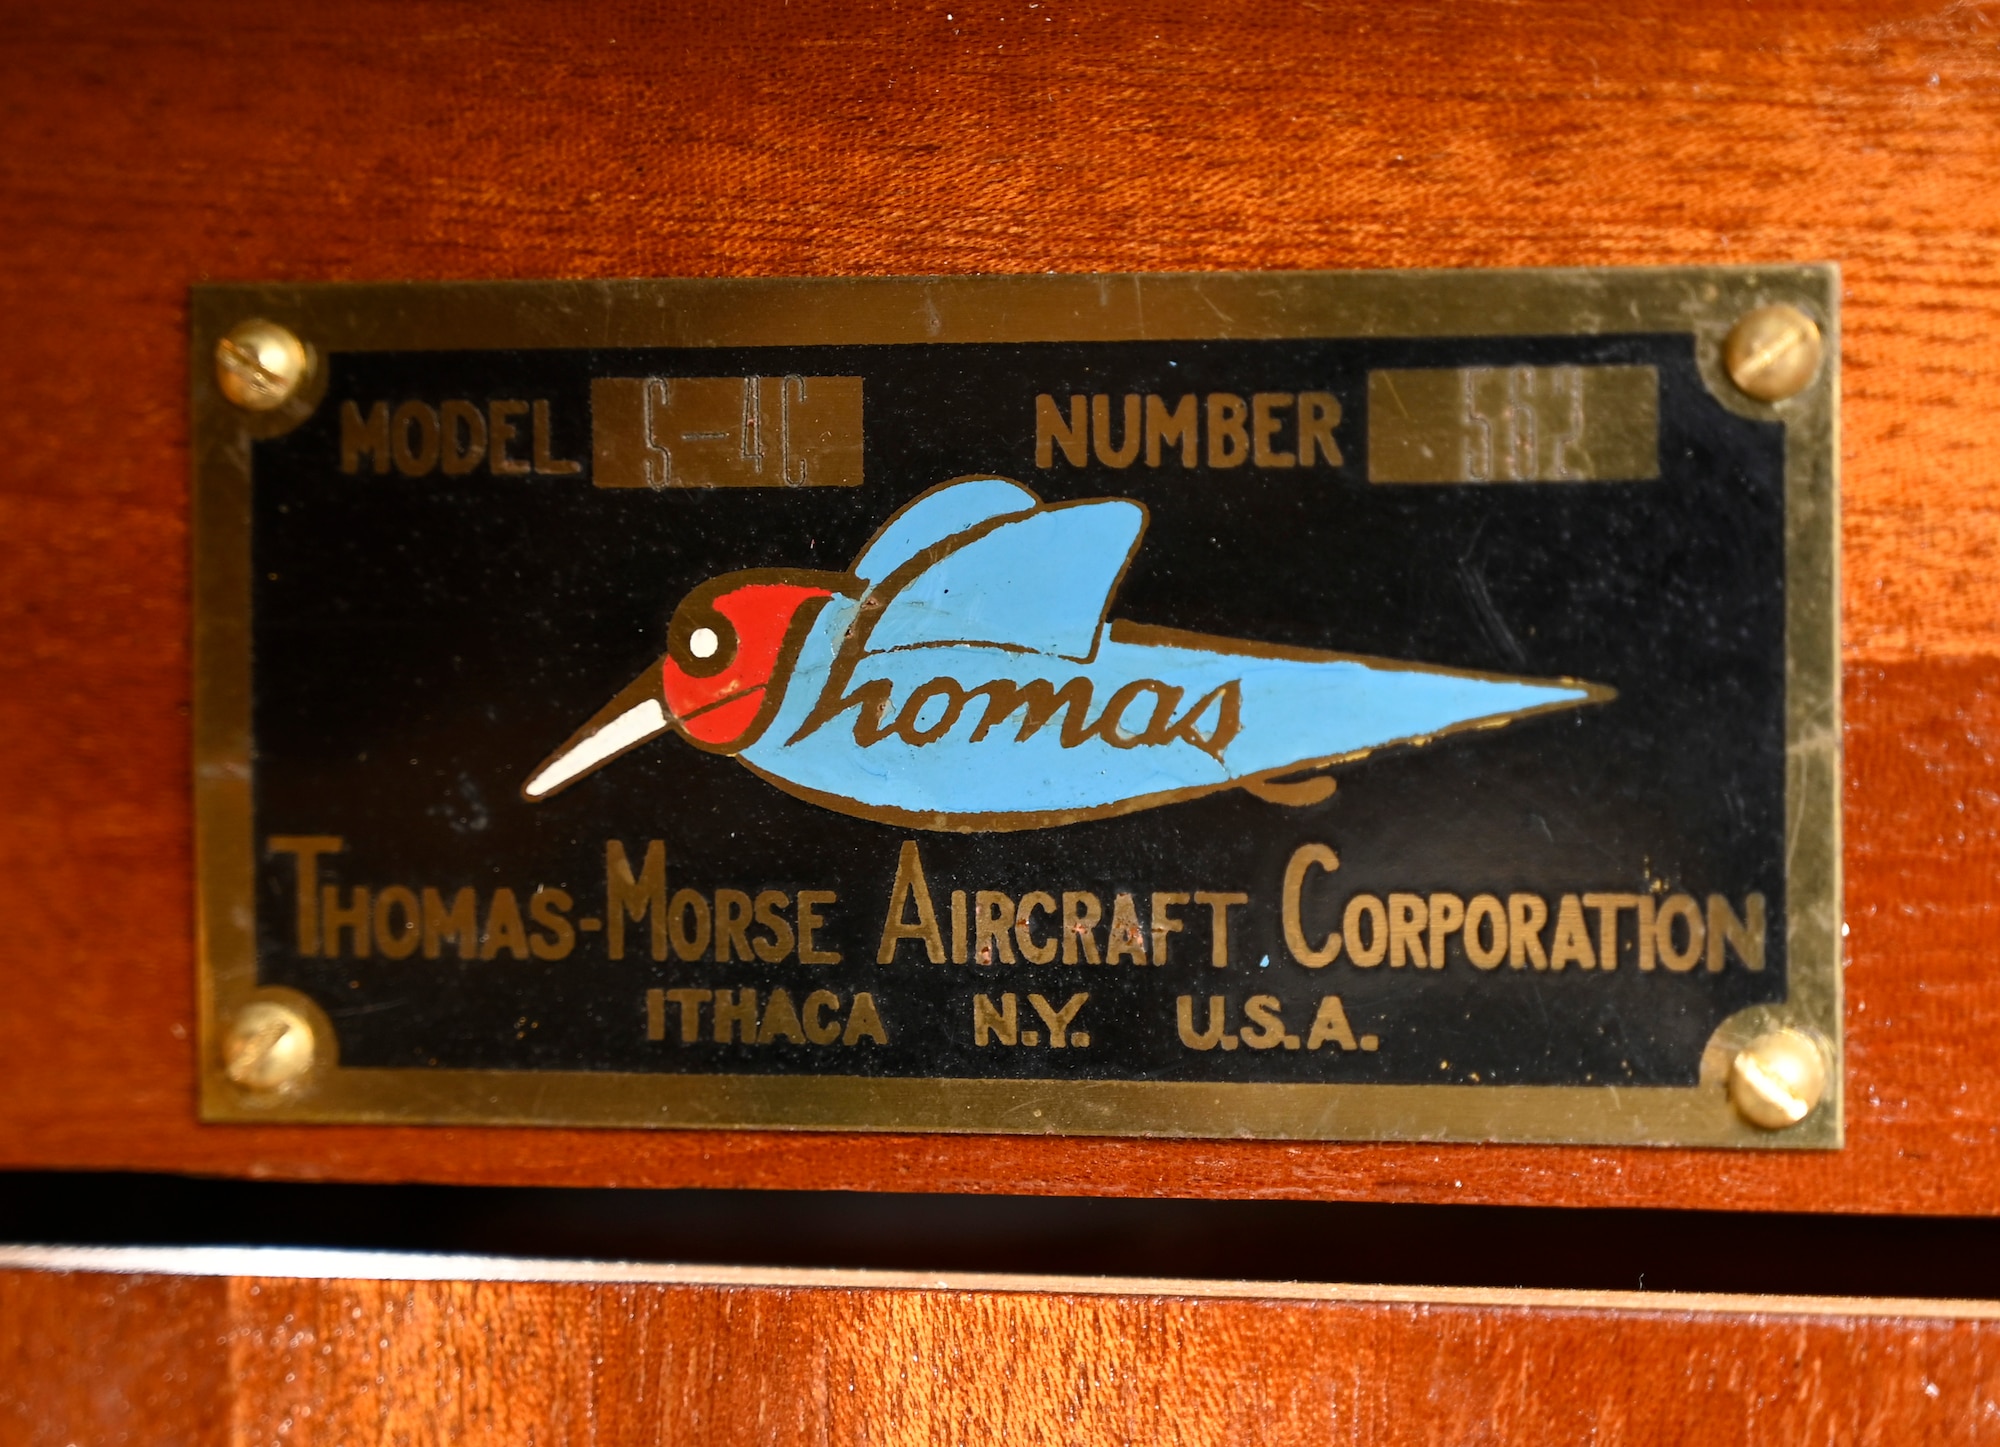 Thomas-Morse S4C Scout early years aircraft.